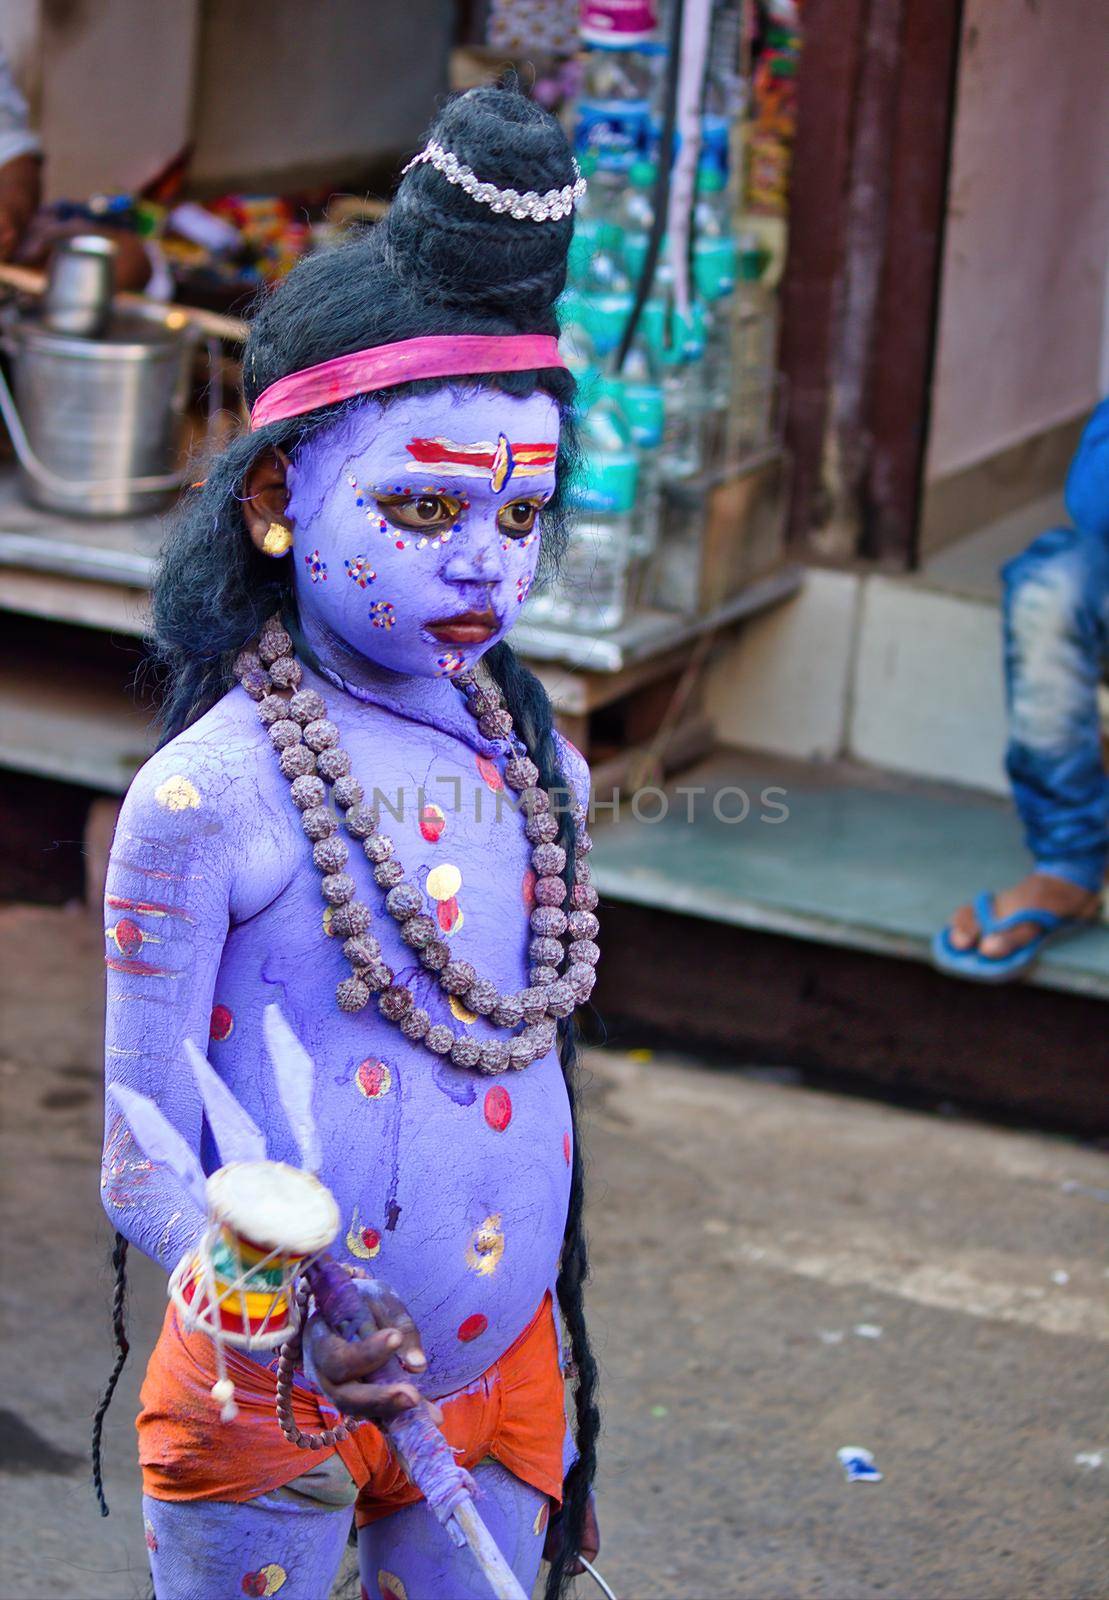 Pushkar, India - NOVEMBER 10, 2016: An unidentified boy dressed and disguised as hindu Lord Shiva with blue paint attends the Pushkar cattle fair in the state of Rajasthan by arpanbhatia